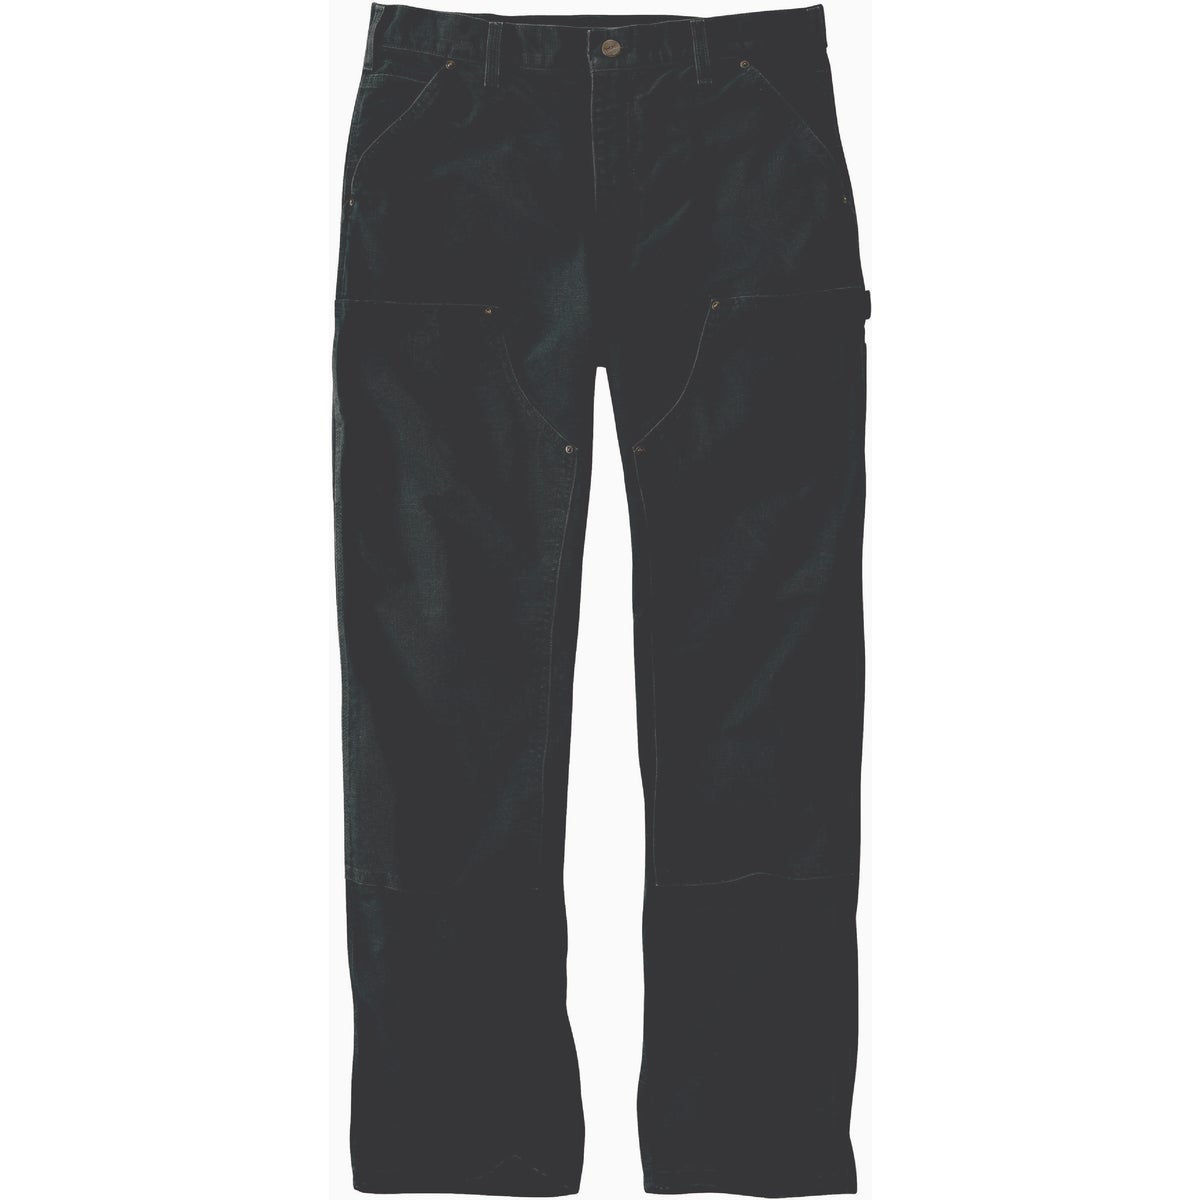 Carhartt Men's 42x34 Black Washed Duck Double-Front Utility Work Pants, Loose  Fit